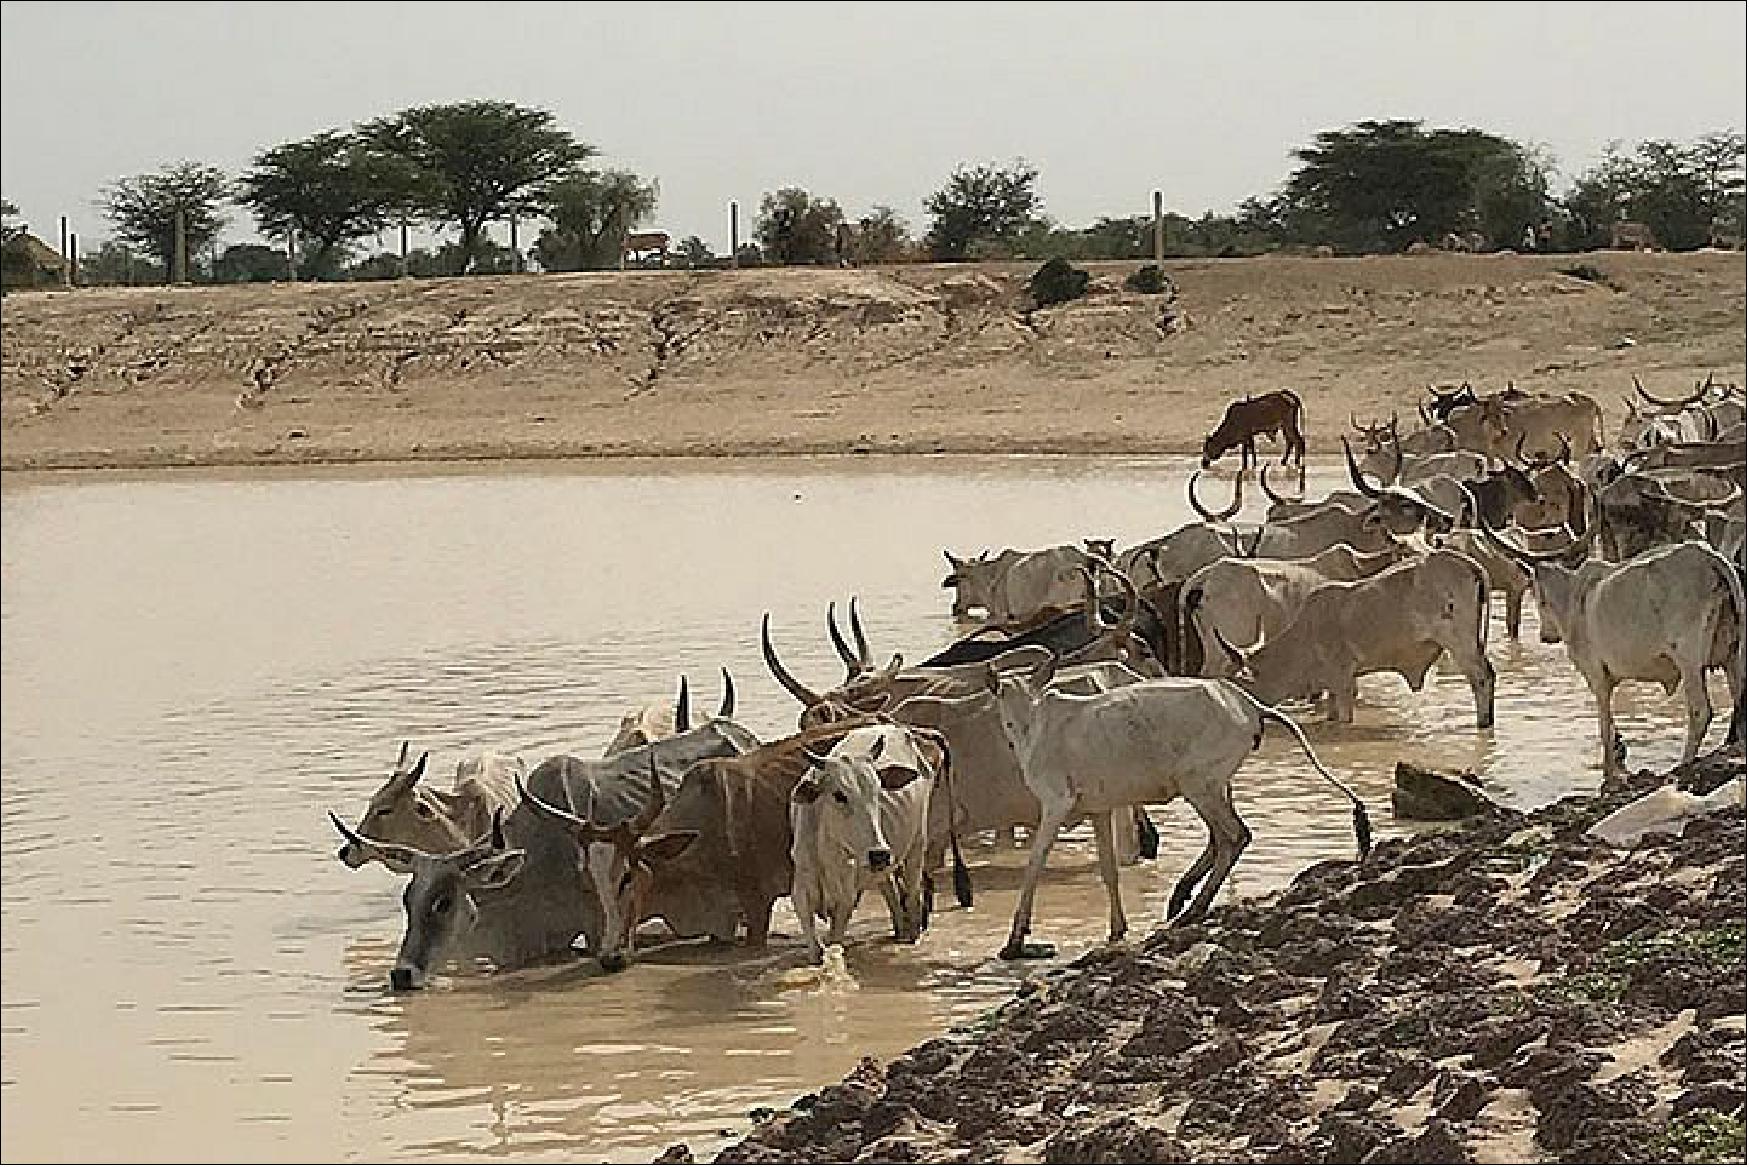 Figure 69: This photograph shows cattle drinking from a watering hole in the Ferlo Valley near the town of Linguère (image credit: NASA Earth Observatory)